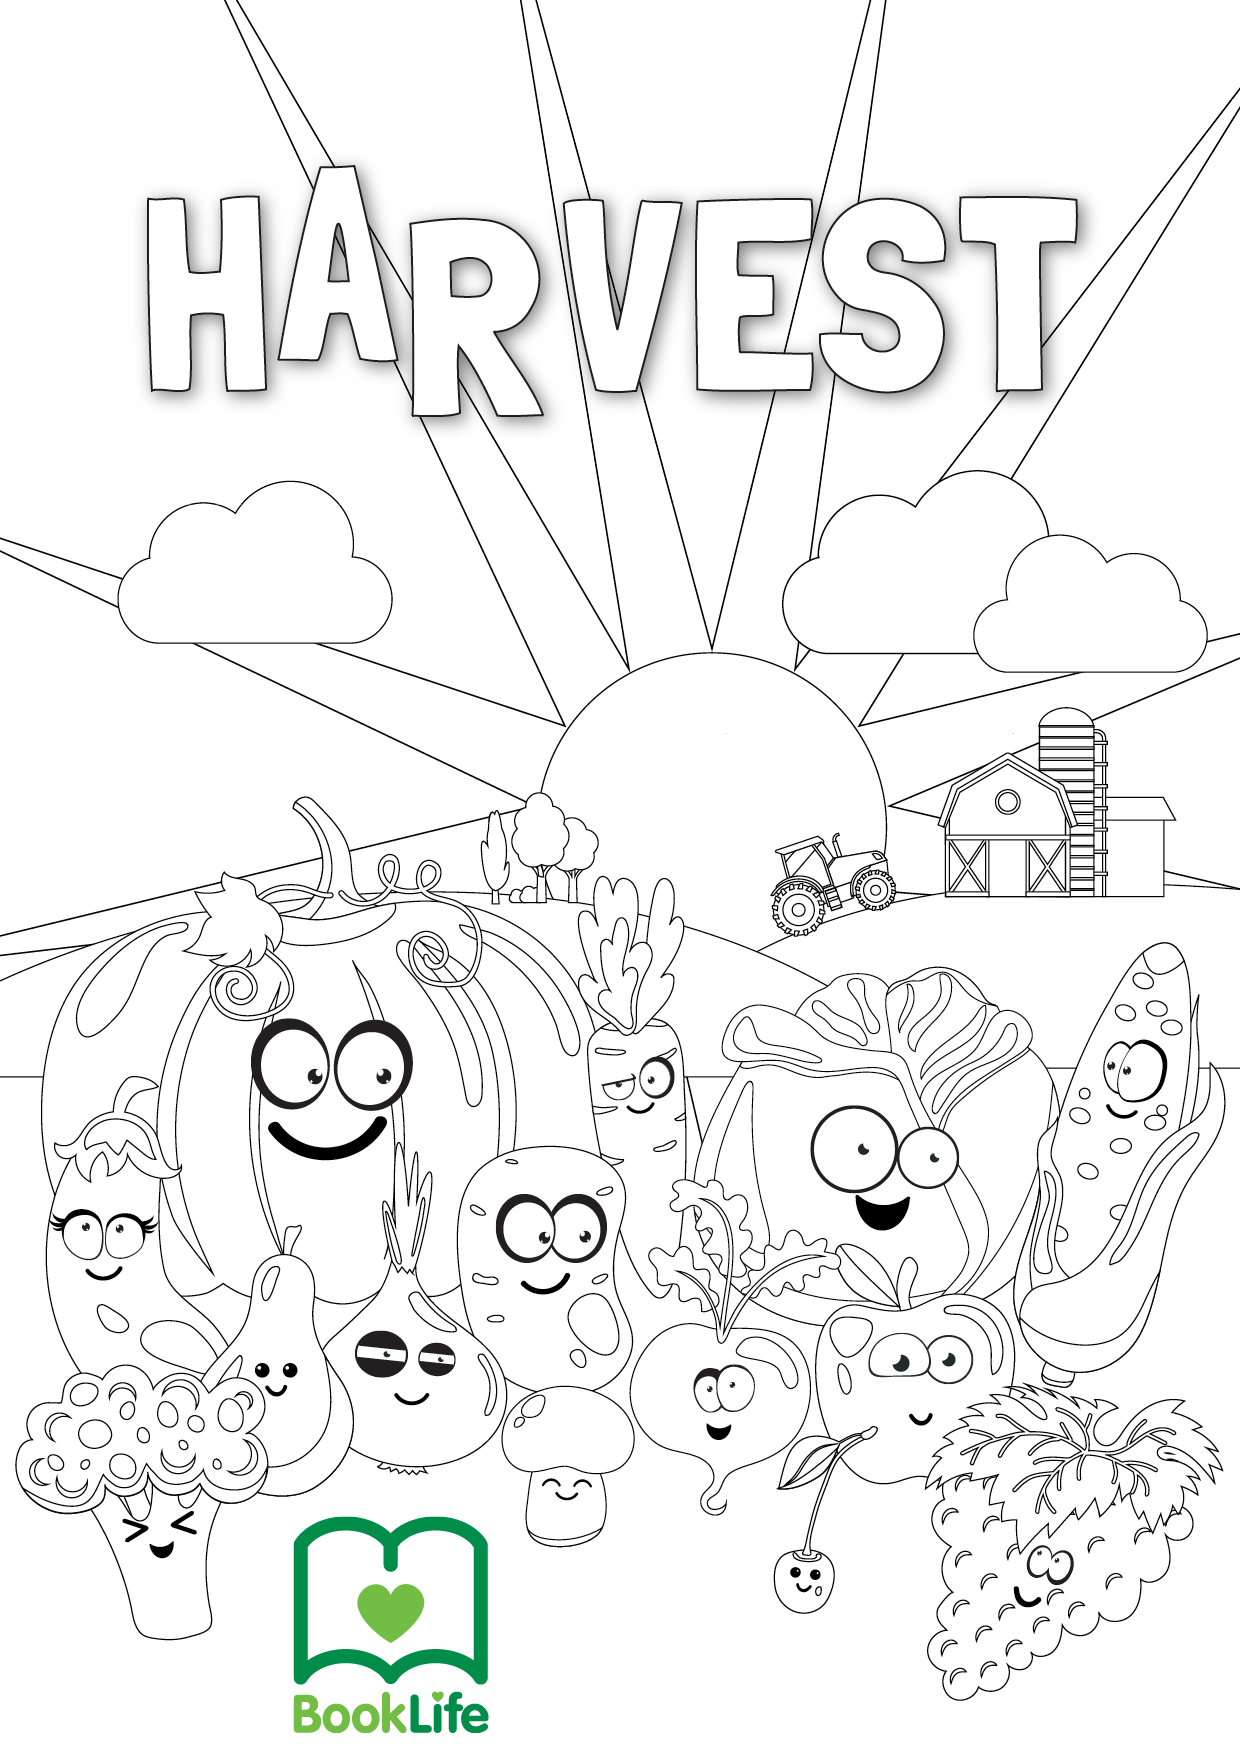 Free Harvest Colouring Activity by BookLife